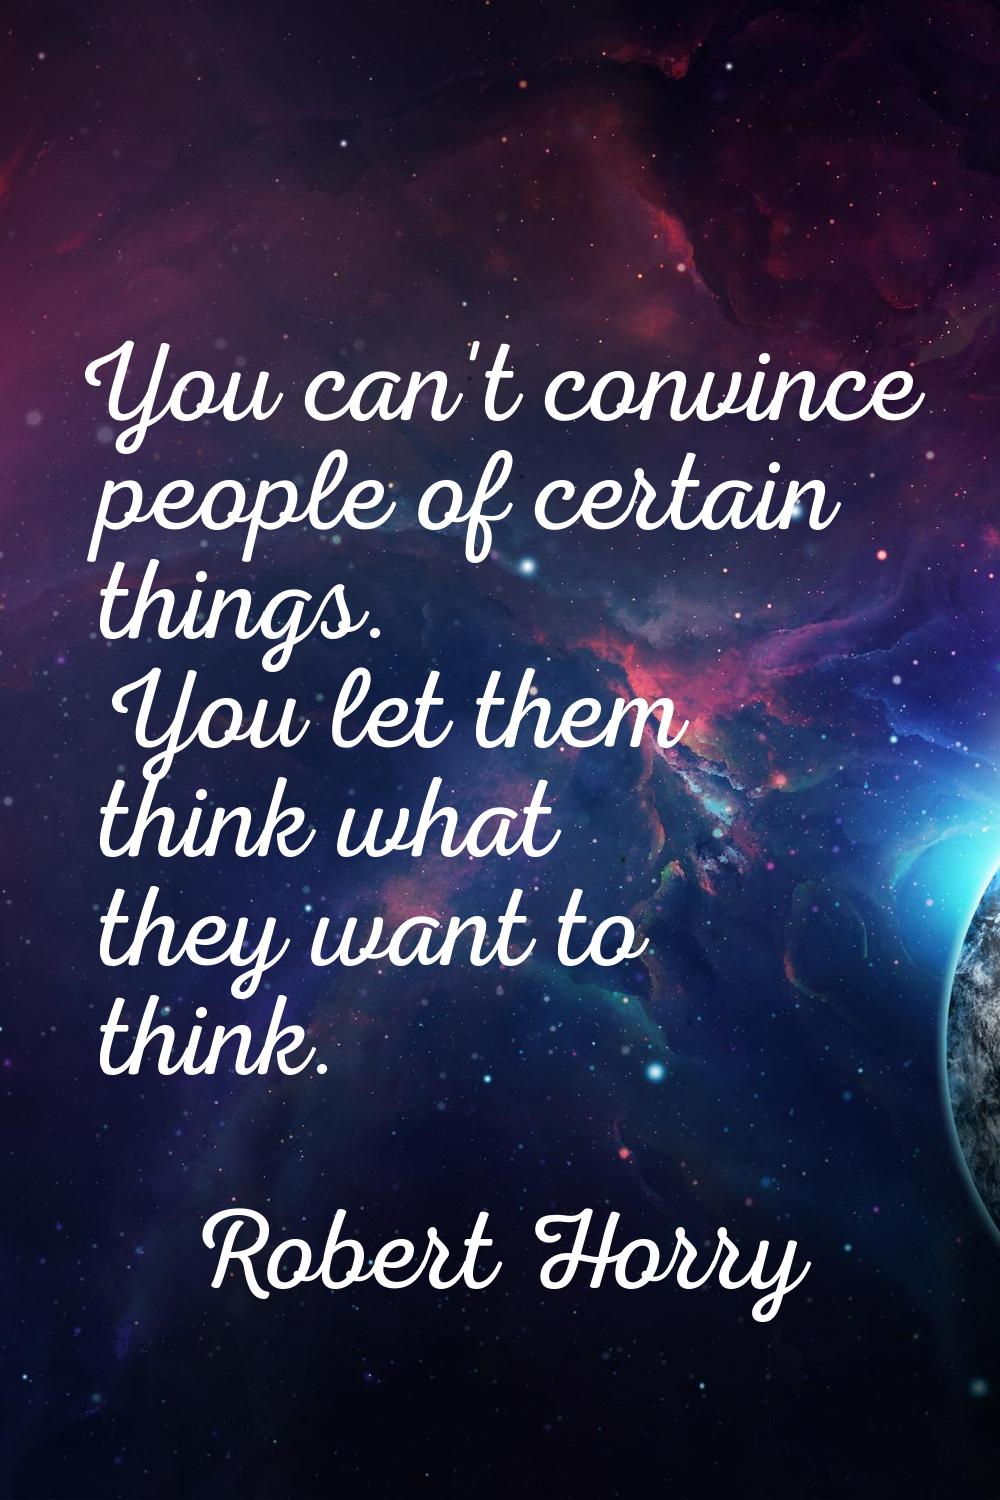 You can't convince people of certain things. You let them think what they want to think.